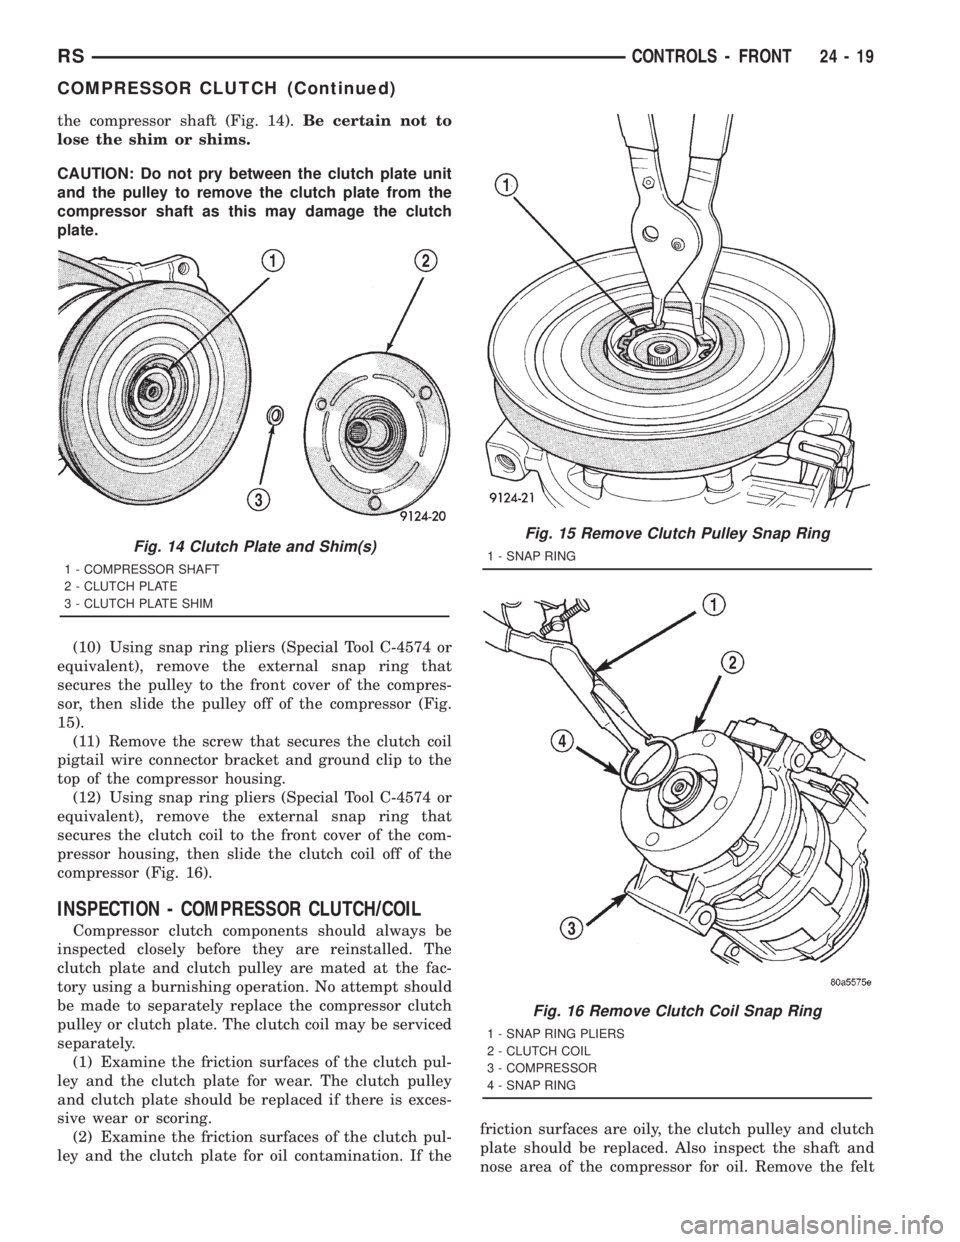 CHRYSLER VOYAGER 2001  Service Manual the compressor shaft (Fig. 14).Be certain not to
lose the shim or shims.
CAUTION: Do not pry between the clutch plate unit
and the pulley to remove the clutch plate from the
compressor shaft as this m